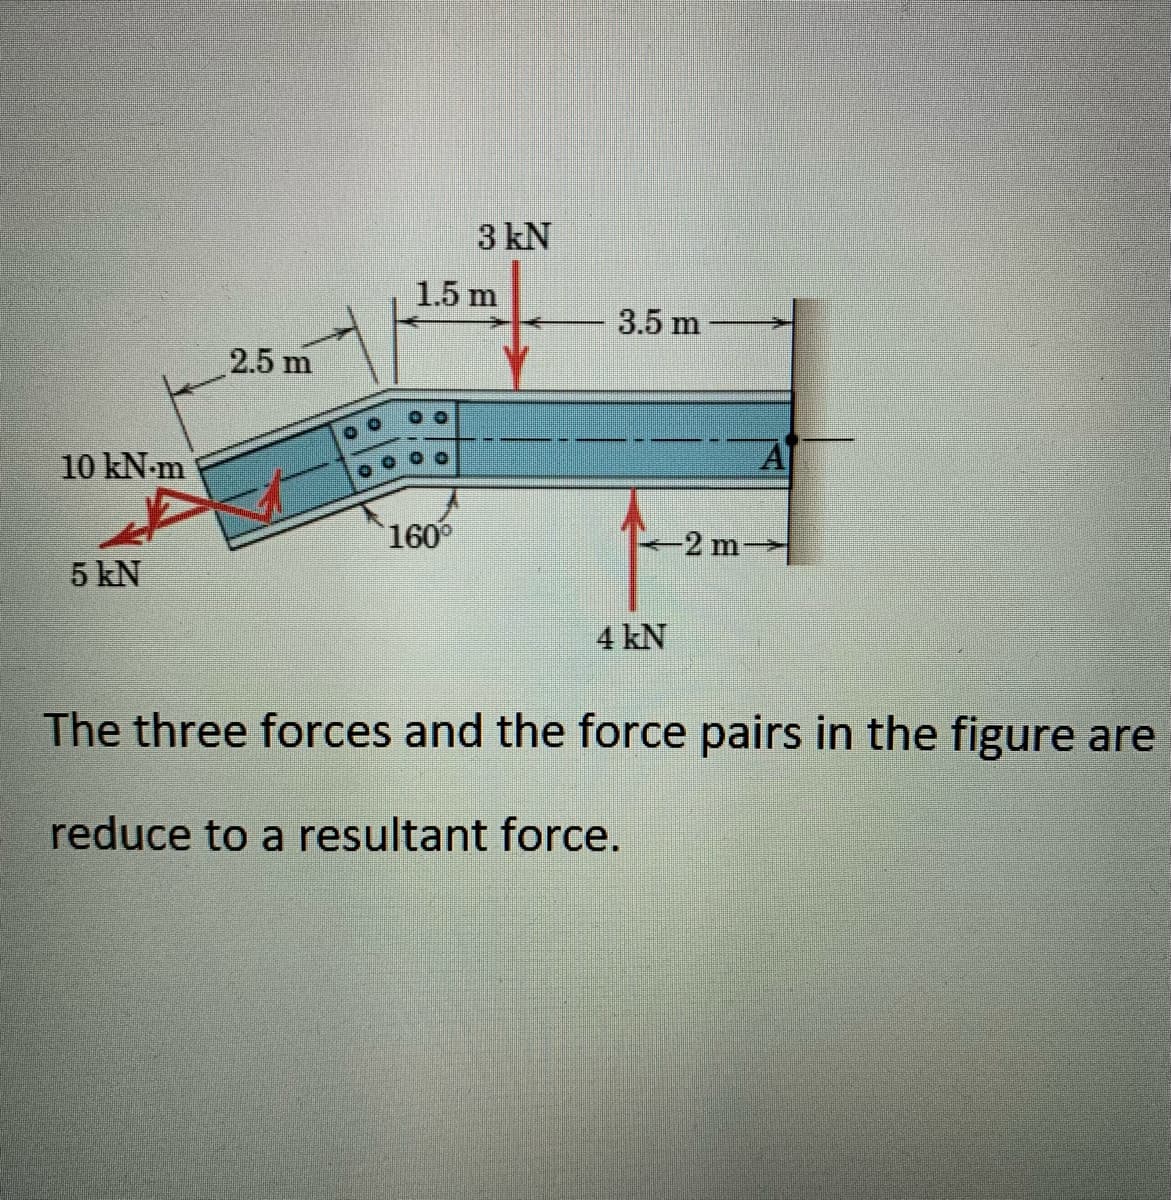 3 kN
1.5 m
3.5 m
2.5 m
10 kN-m
A
160°
2 m
5 kN
4 kN
The three forces and the force pairs in the figure are
reduce to a resultant force.
